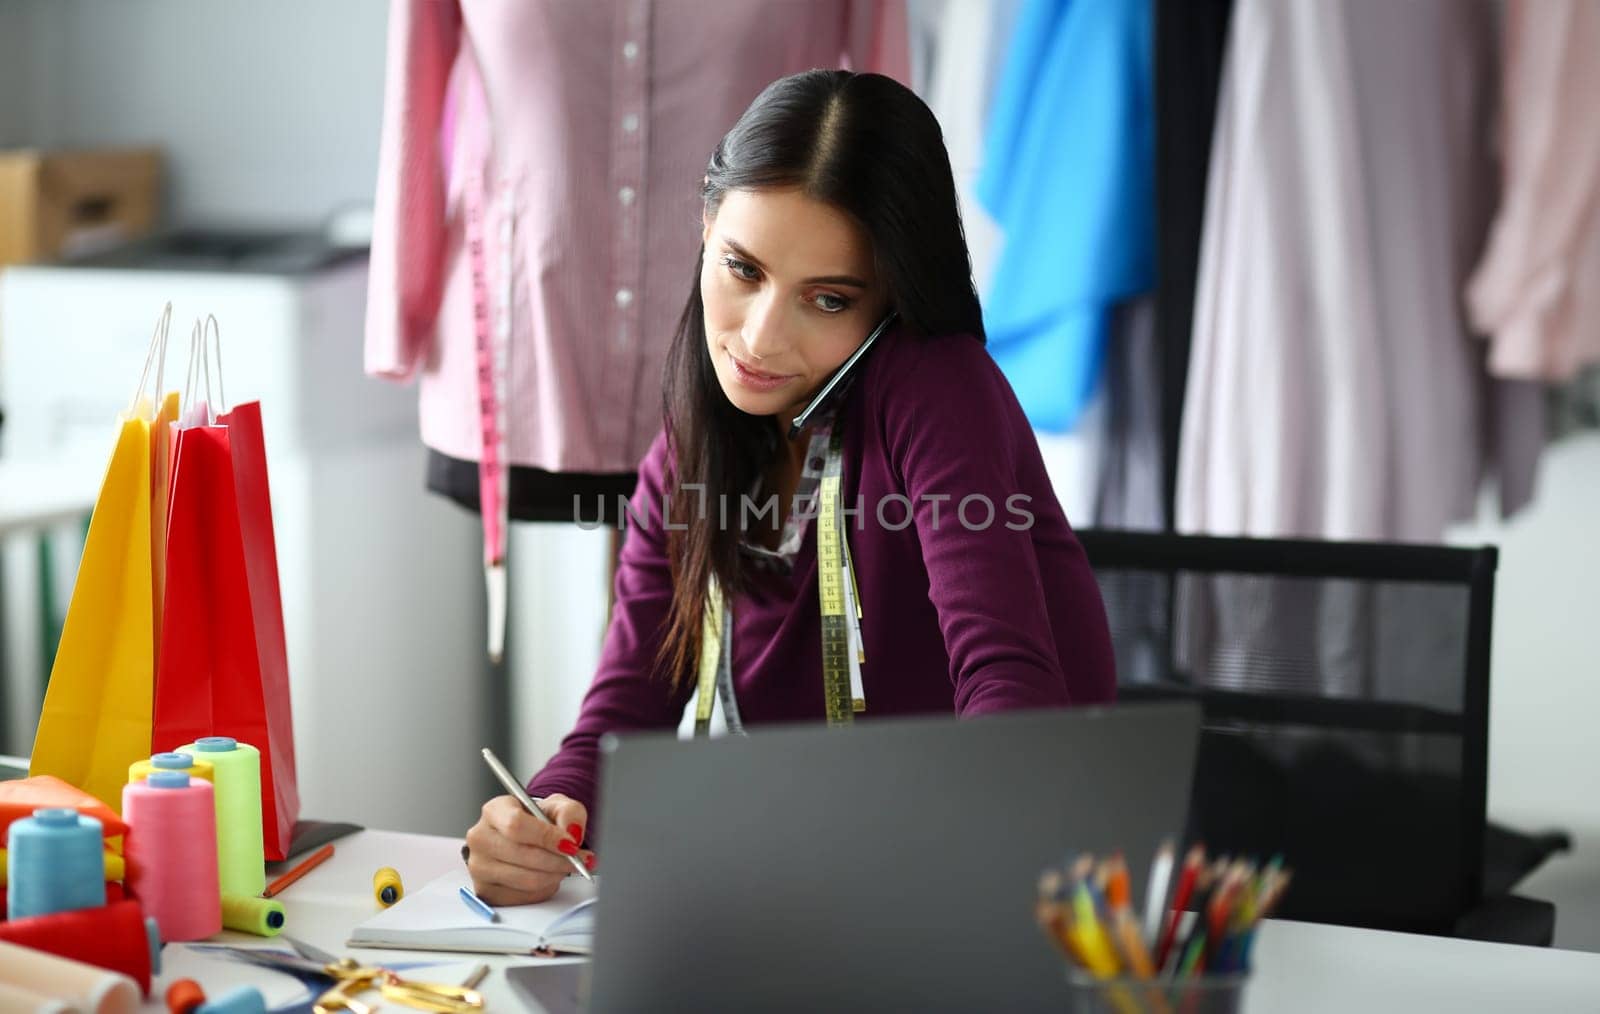 Adult caucasian beauty businesswoman takes an order by phone looks at laptop screen and makes notes in notebook an office background. Delivery and tailoring clothes concept.